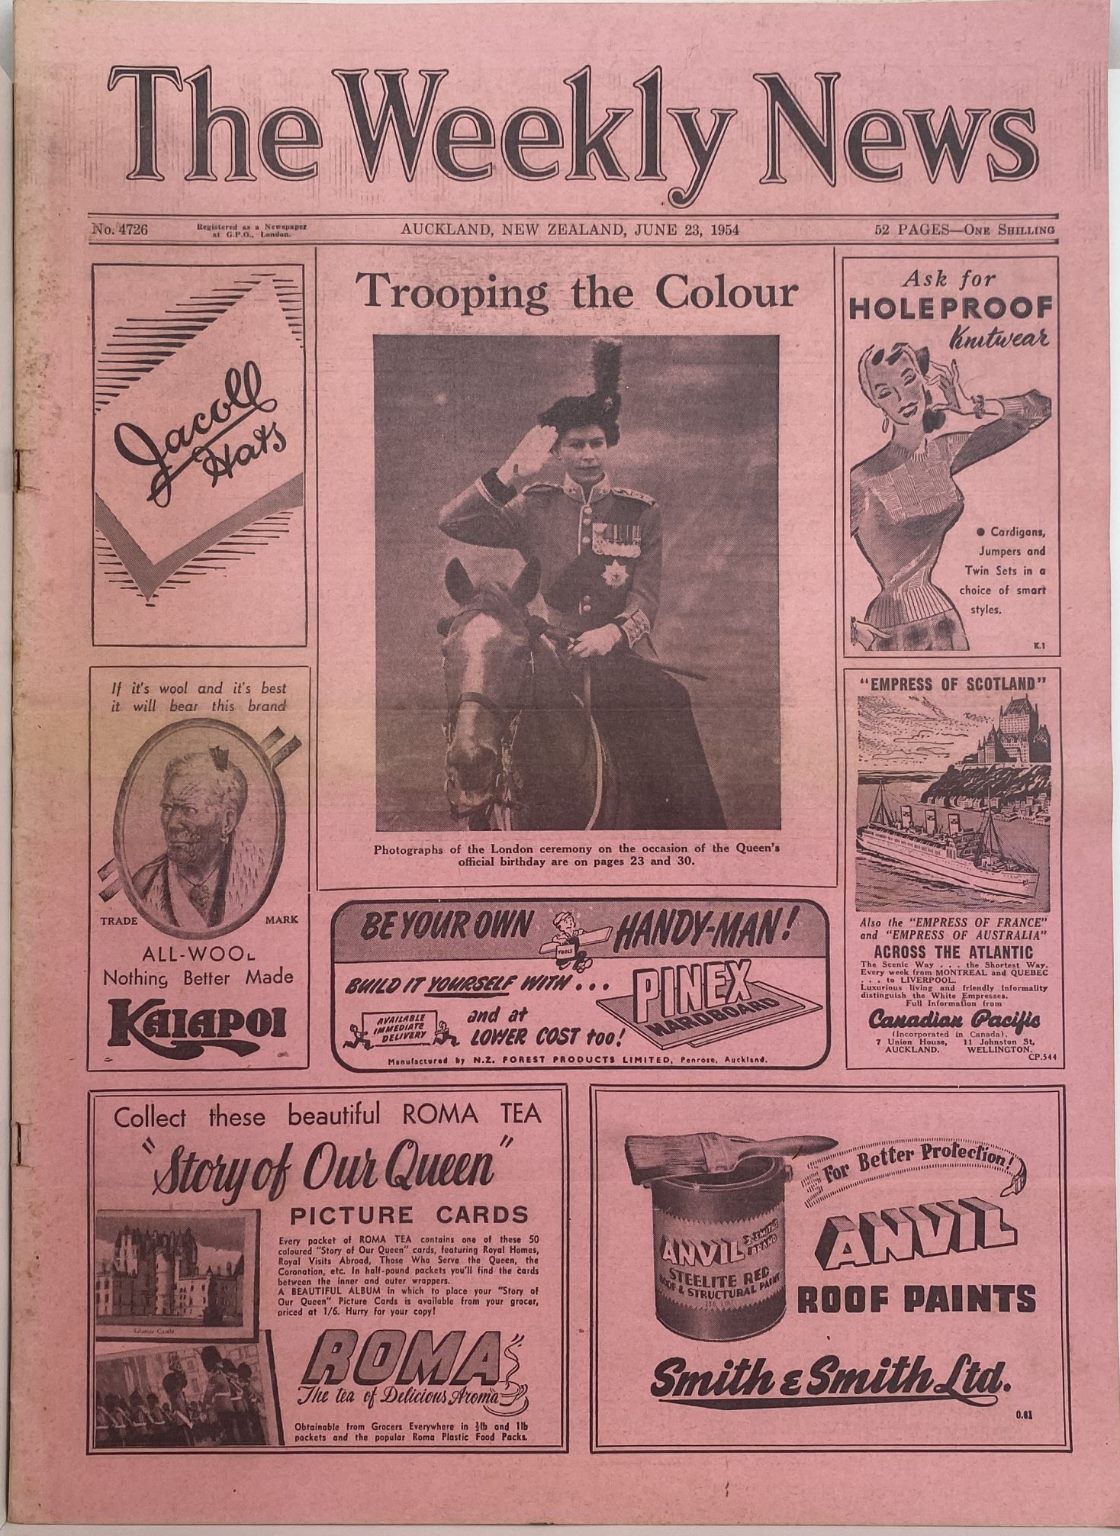 OLD NEWSPAPER: The Weekly News - No. 4726, 23 June 1954